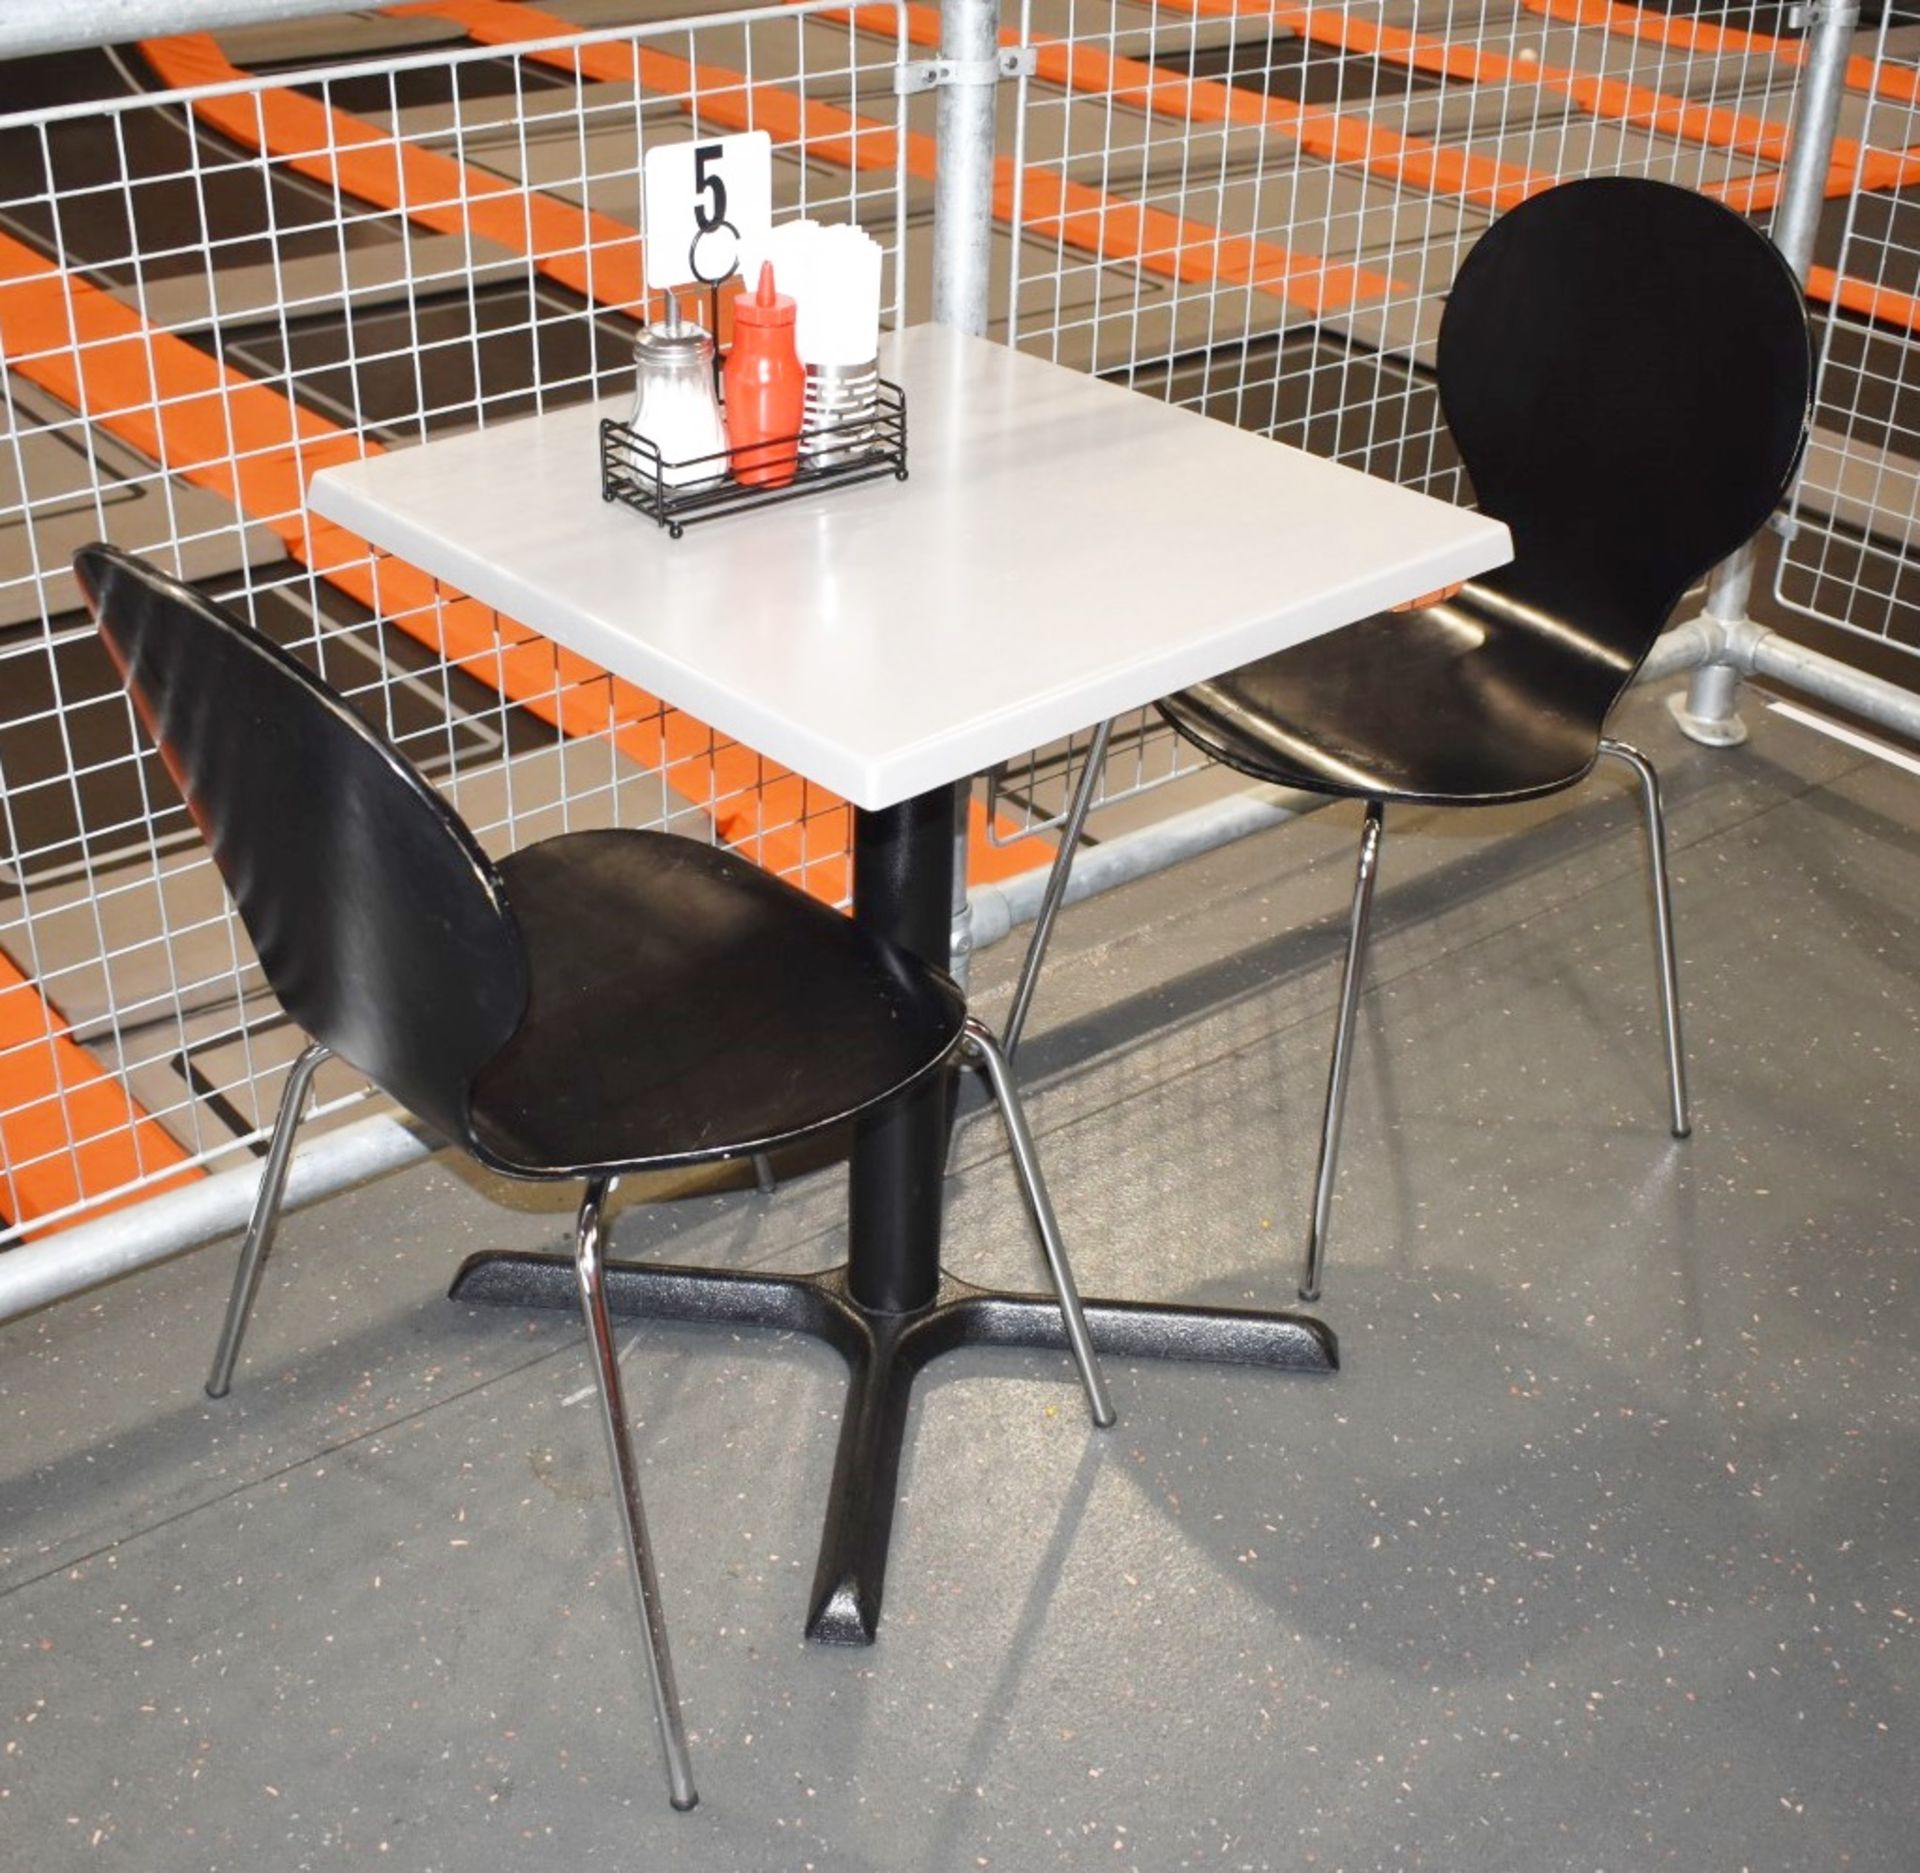 8 x Table and Chair Sets Suitable For Canteens, Cafes or Bistros - Includes 8 Tables and 24 Chairs